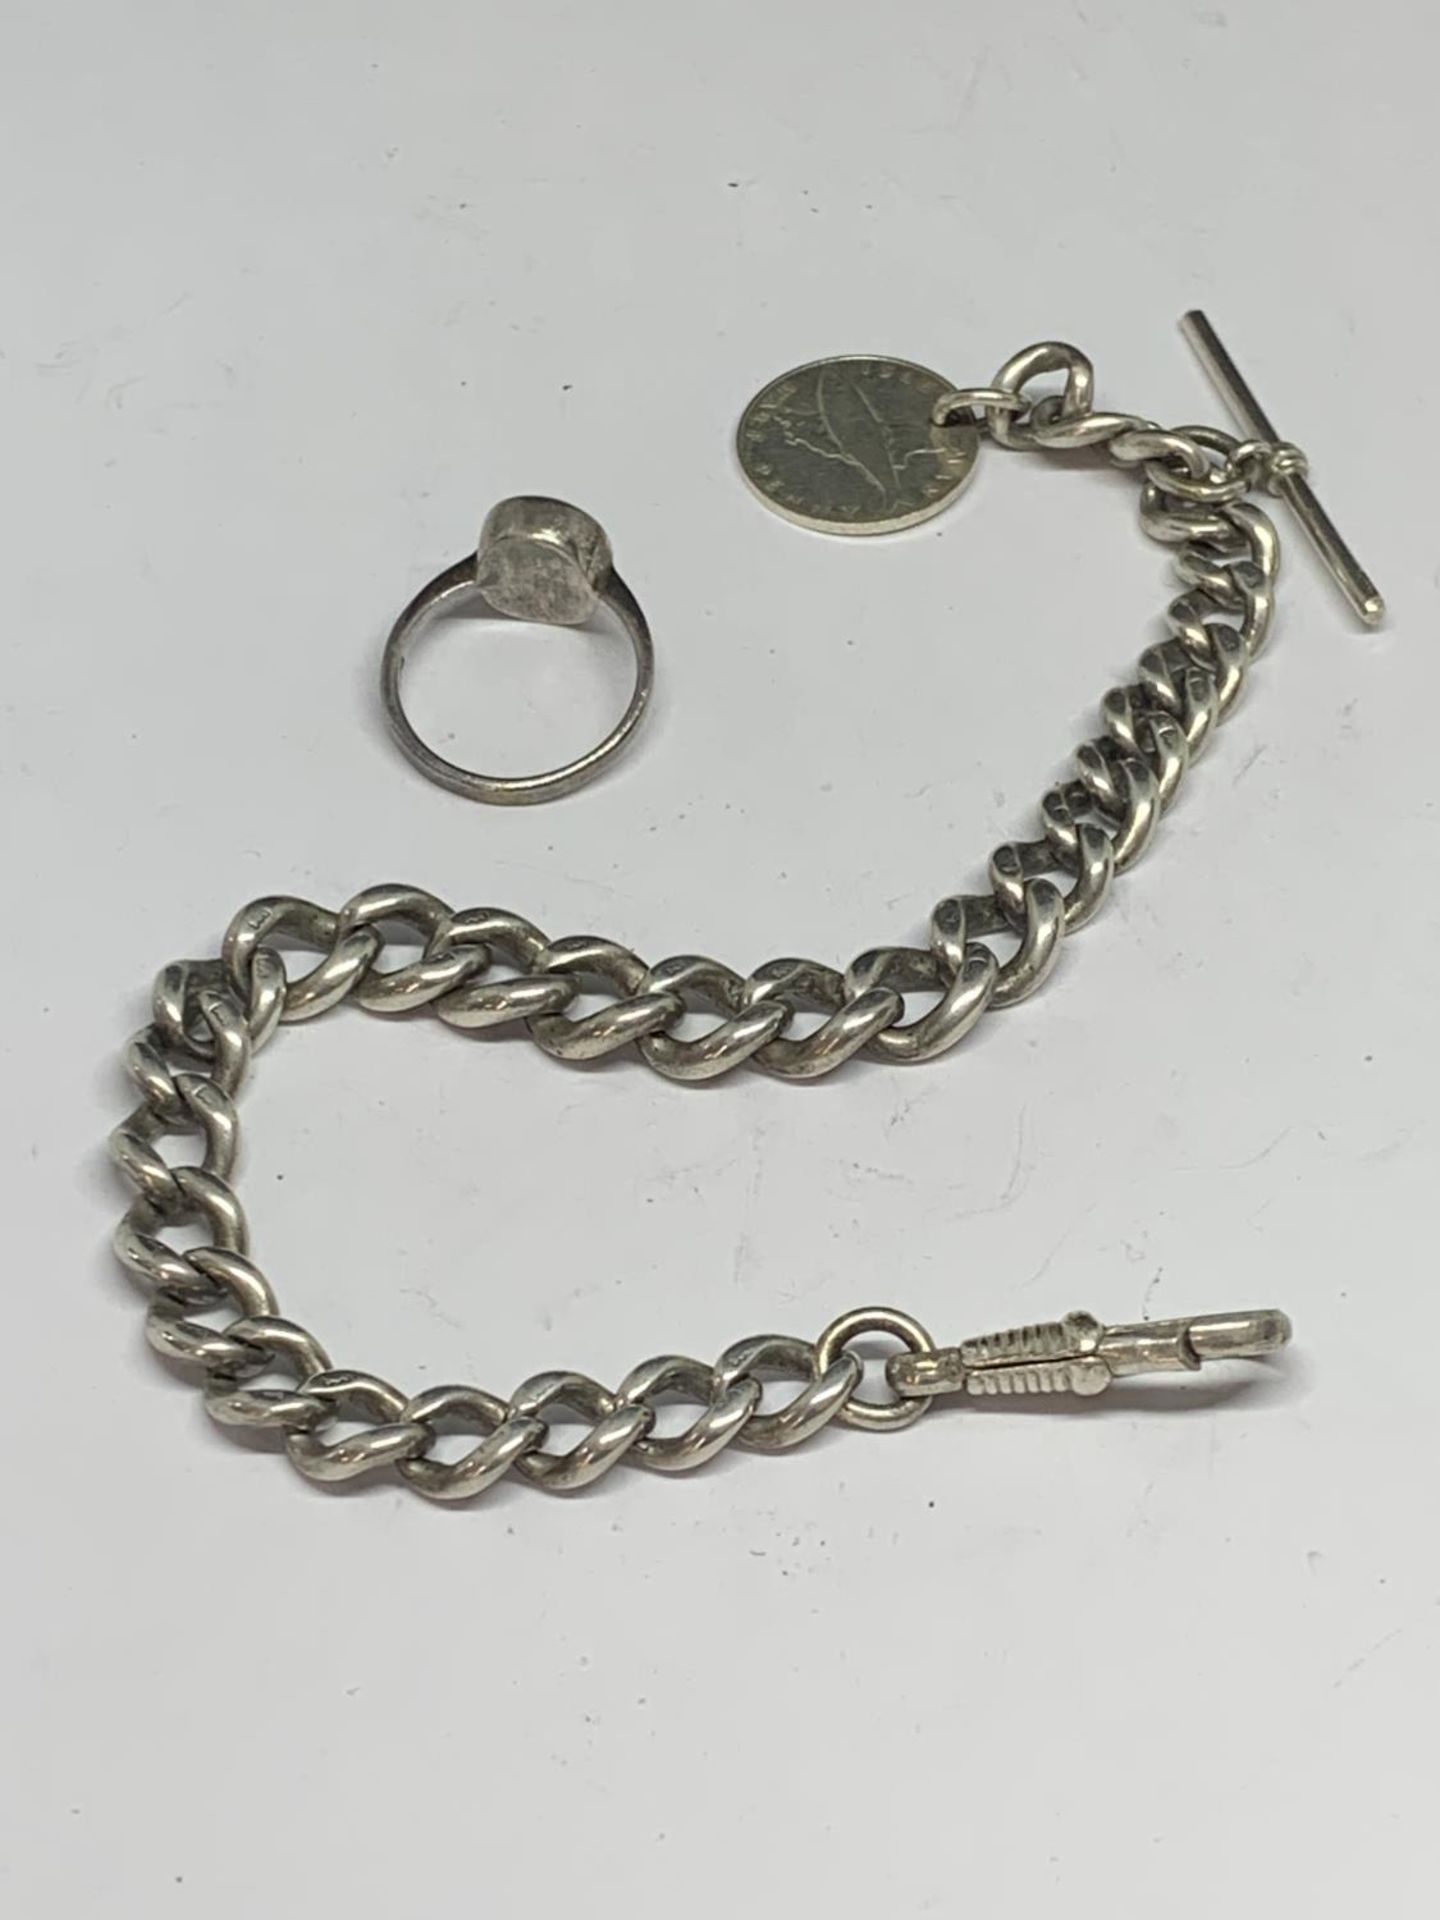 A HEAVY SILVER HALF ALBERT WATCH CHAIN WITH A 1976 ISLE OF MAN HALF PENNY AND A SILVER RING WITH - Image 5 of 5